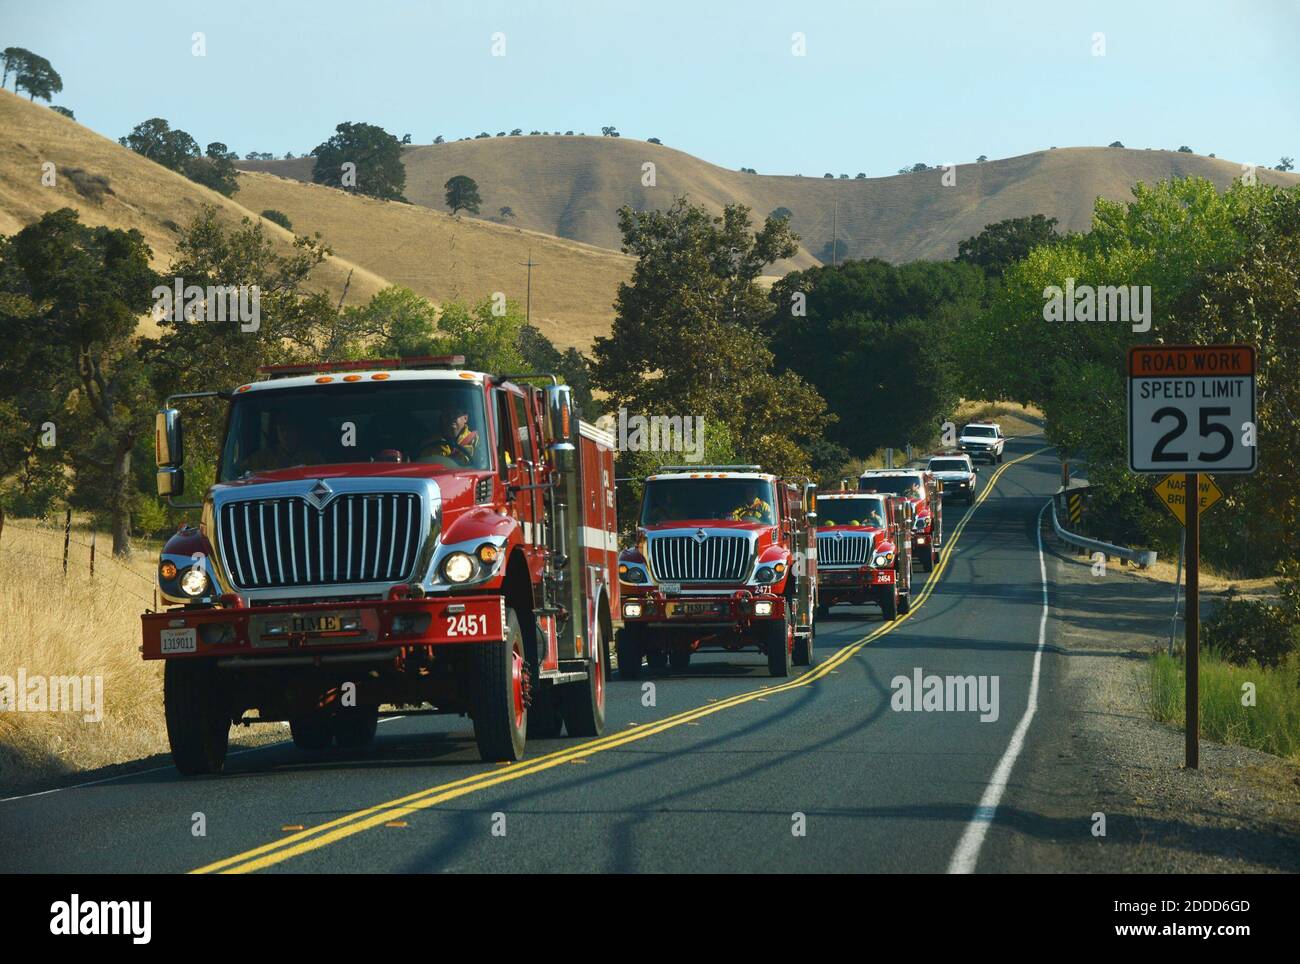 NO FILM, NO VIDEO, NO TV, NO DOCUMENTARY - Cal Fire trucks travel towards Clayton along Marsh Creek Road in an unincorporated area of Contra Costa County, California, USA, as they move into their next position to fight the Morgan Fire near Clayton on Monday, September 9, 2013. Photo by Susan Tripp Pollard/Bay Area News Group/MCT/ABACAPRESS.COM Stock Photo